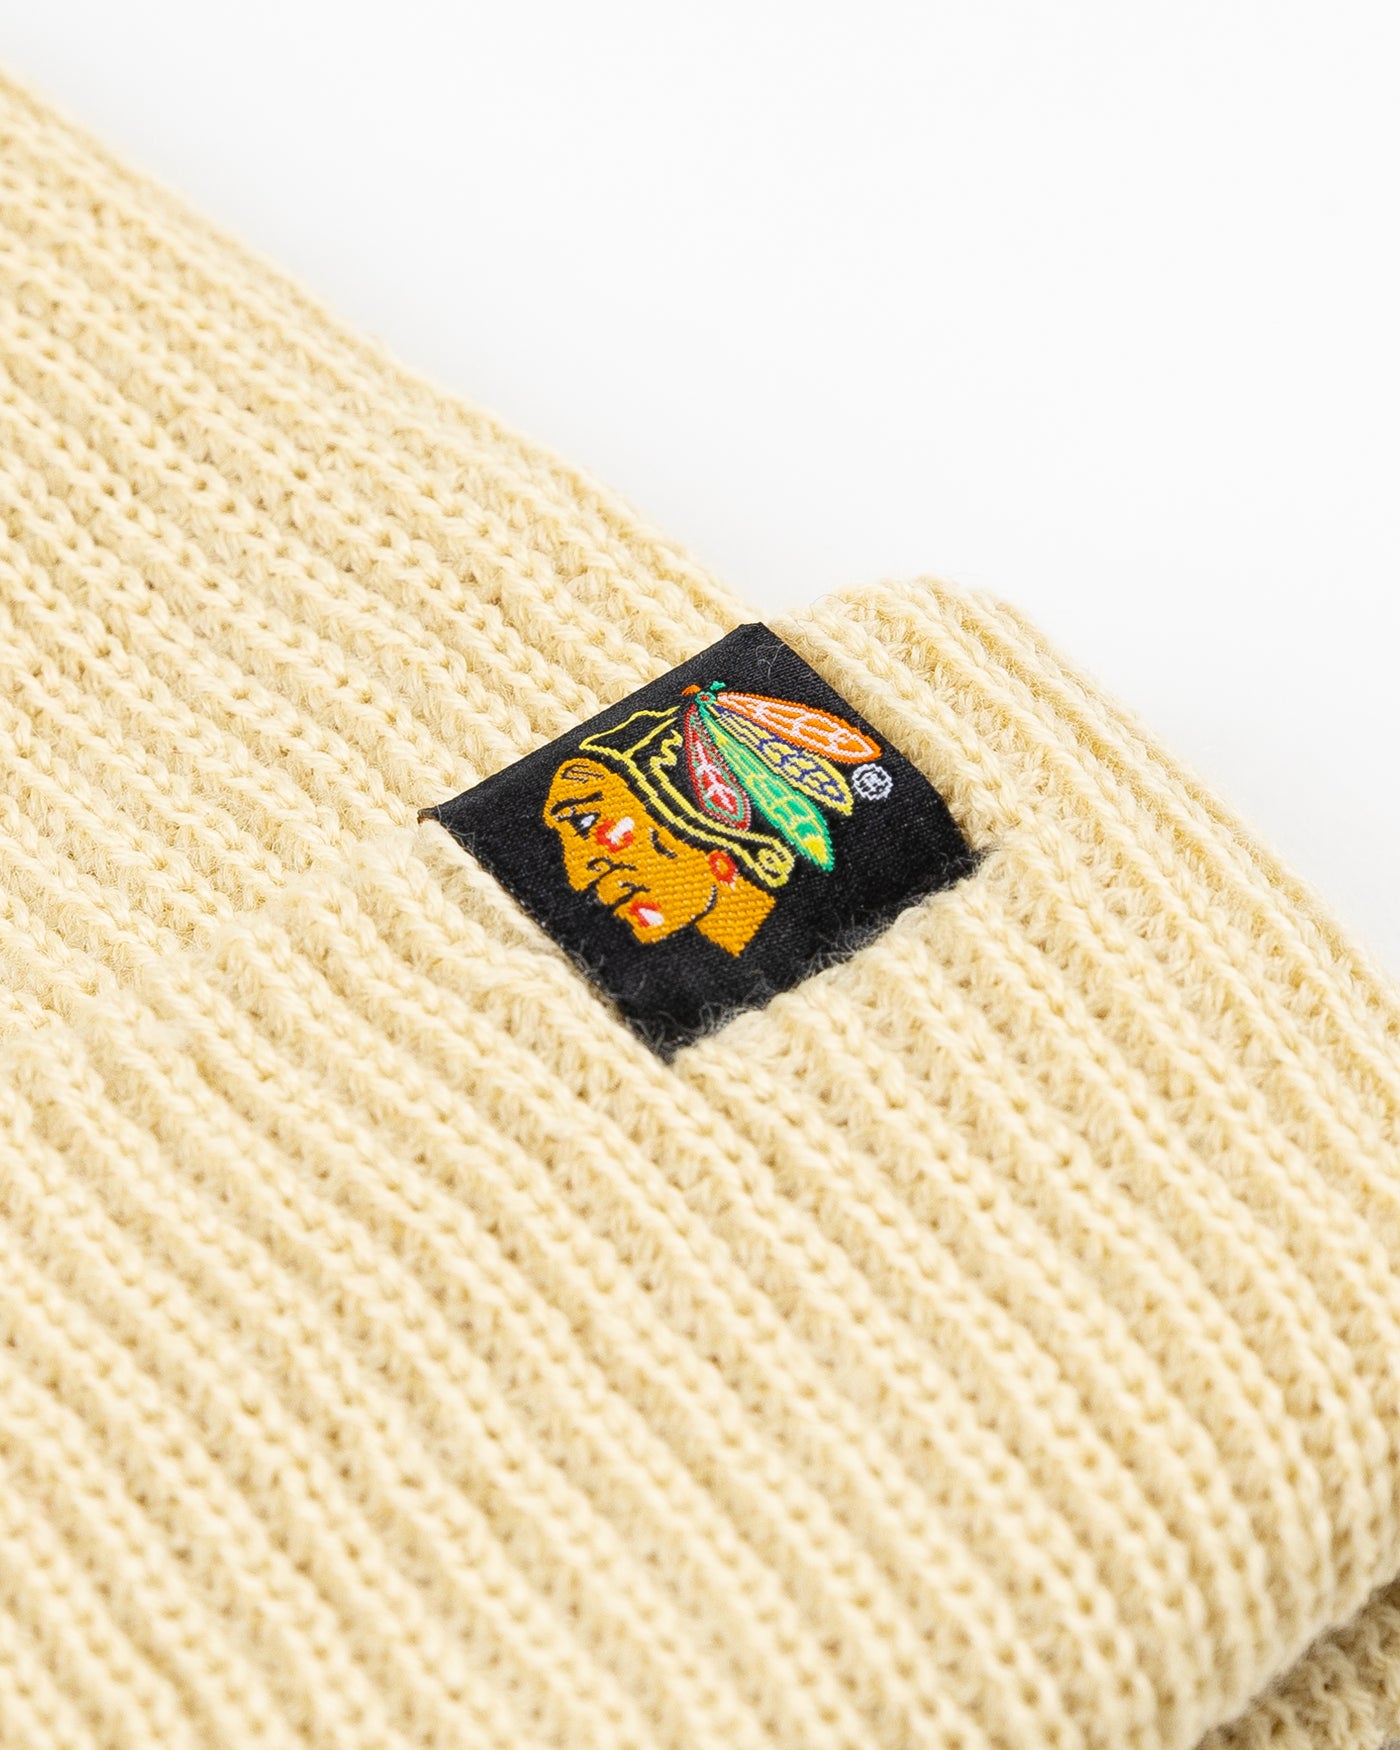 cream colored Sportiqe knit beanie with Chicago Blackhawks primary logo patch stitched on front cuff - detail lay flat